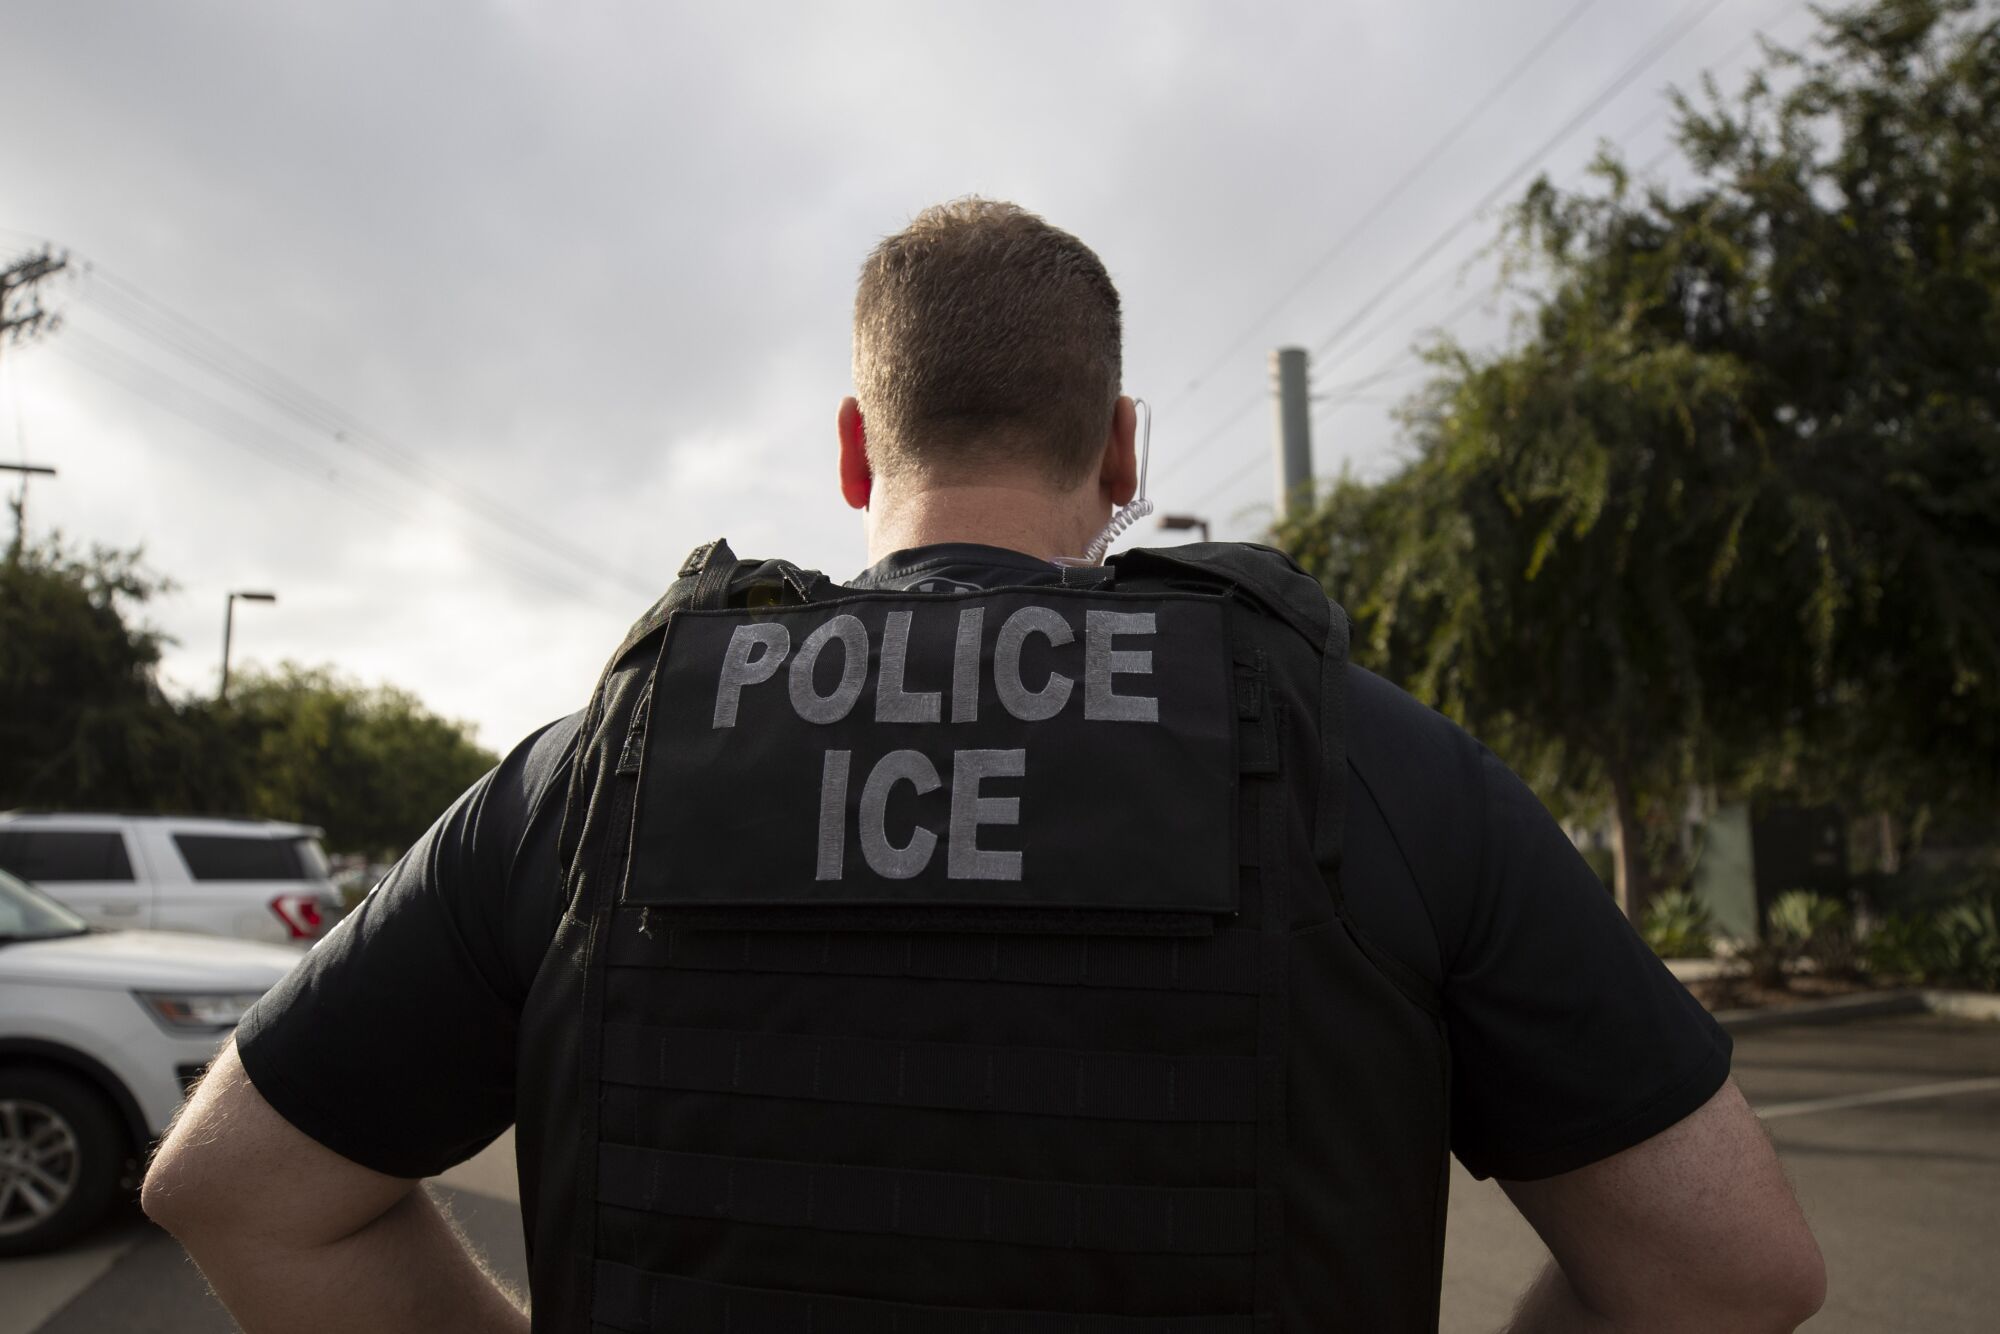 A U.S. Immigration and Customs Enforcement (ICE) officer 